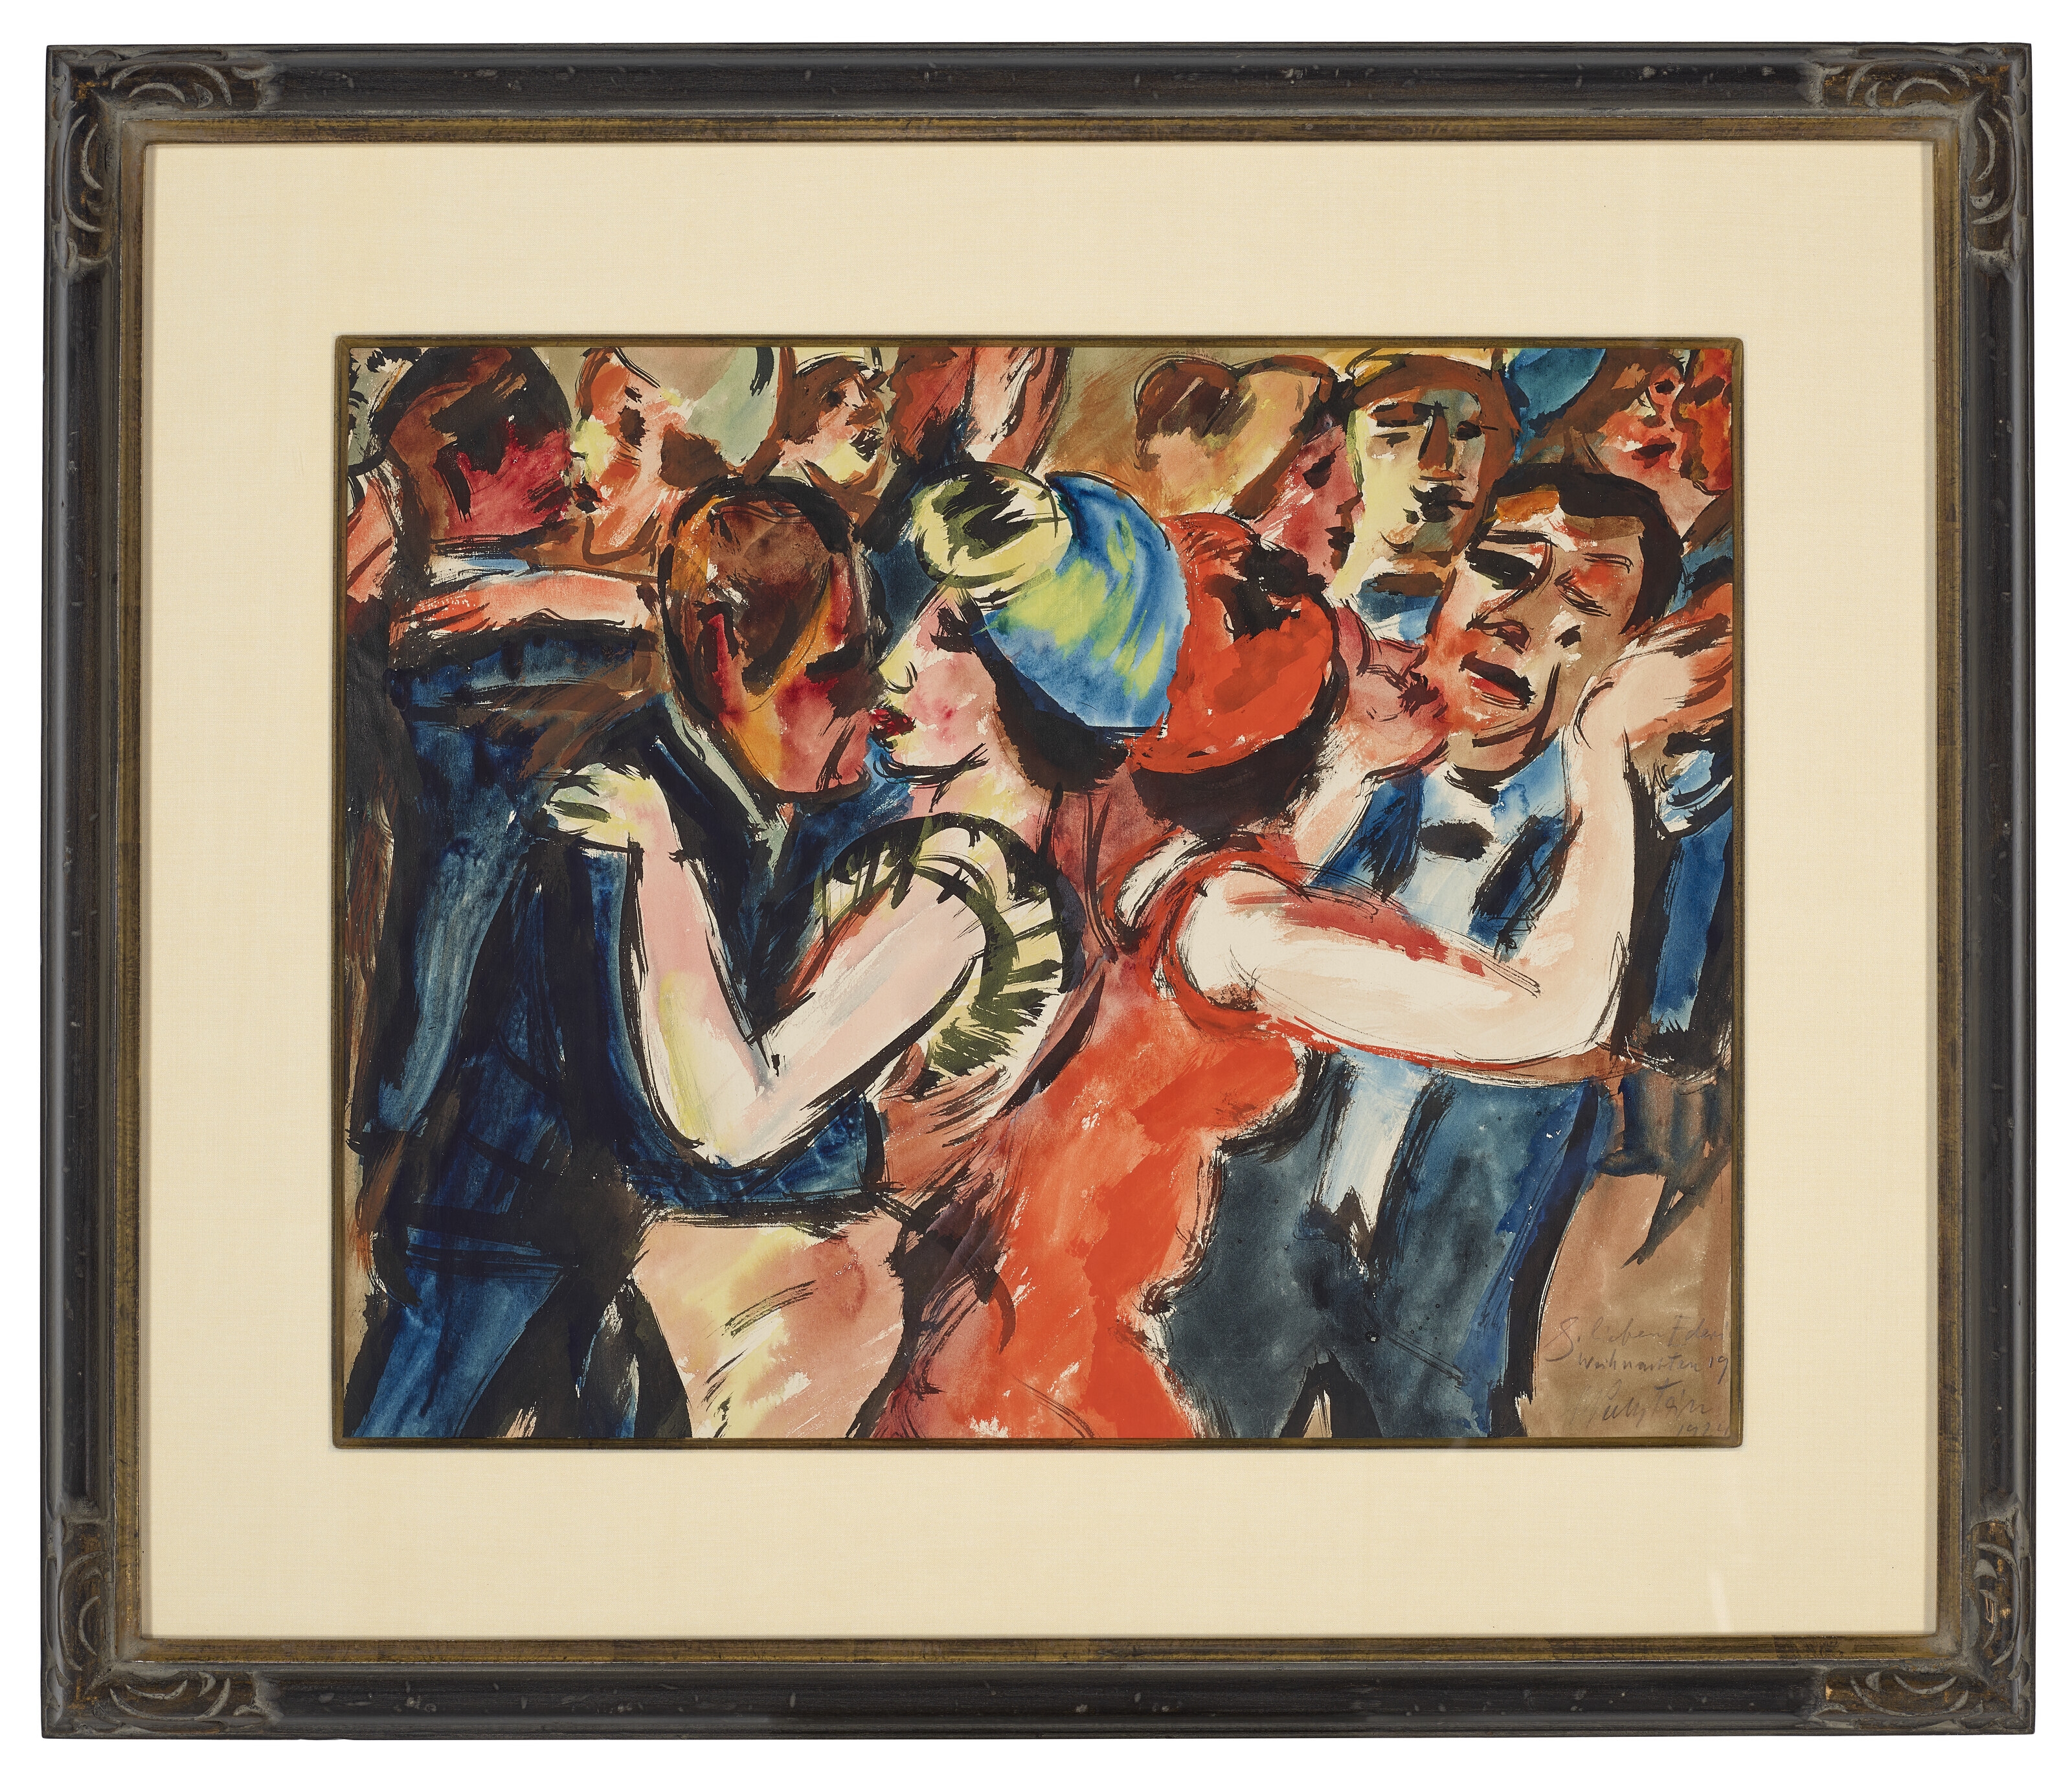 Artwork by Max Pechstein, Beim Tanz 1 (Tanzparty 1), Made of gouache, watercolor and brush and black ink on paper